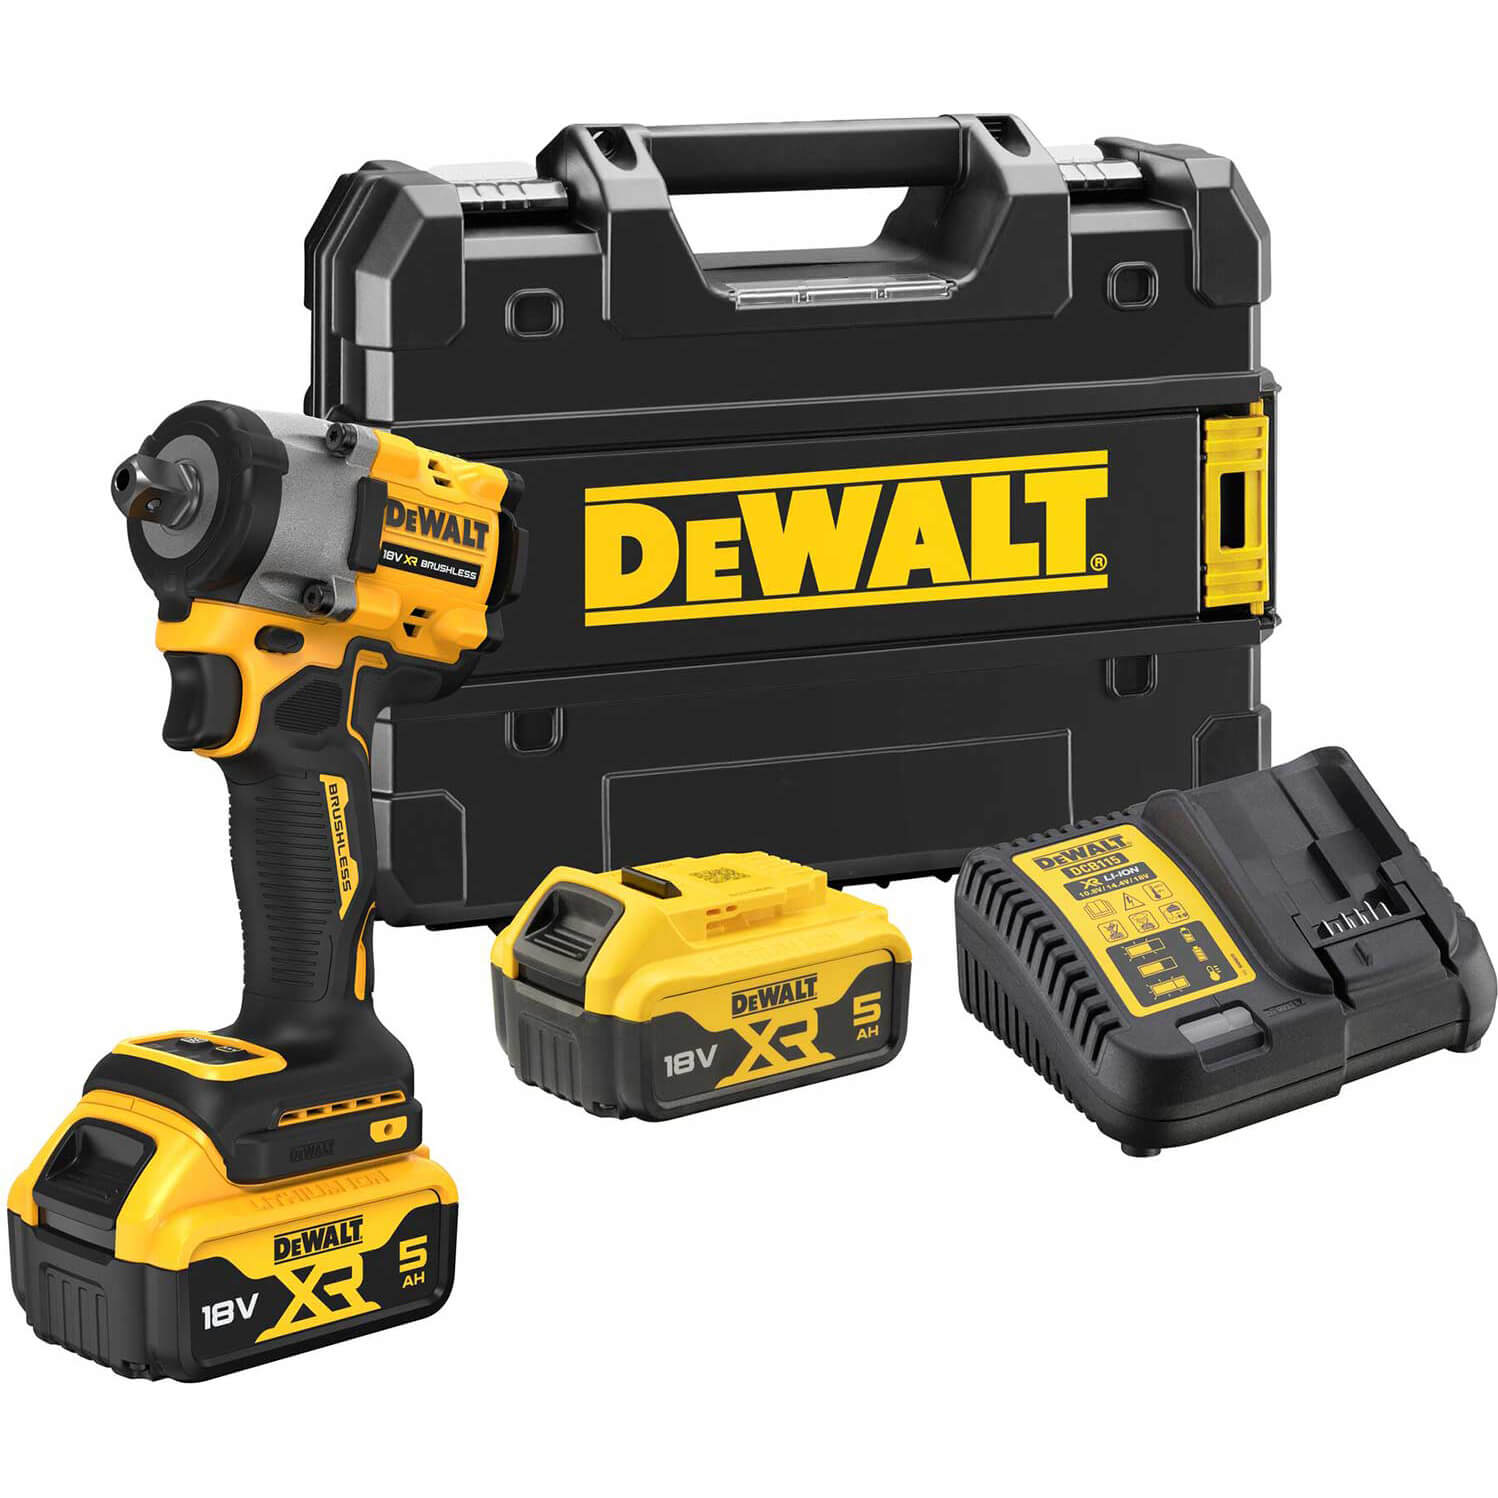 DeWalt DCF922 18v XR Cordless Brushless 1/2" Compact Impact Wrench 2 x 5ah Li-ion Charger Case